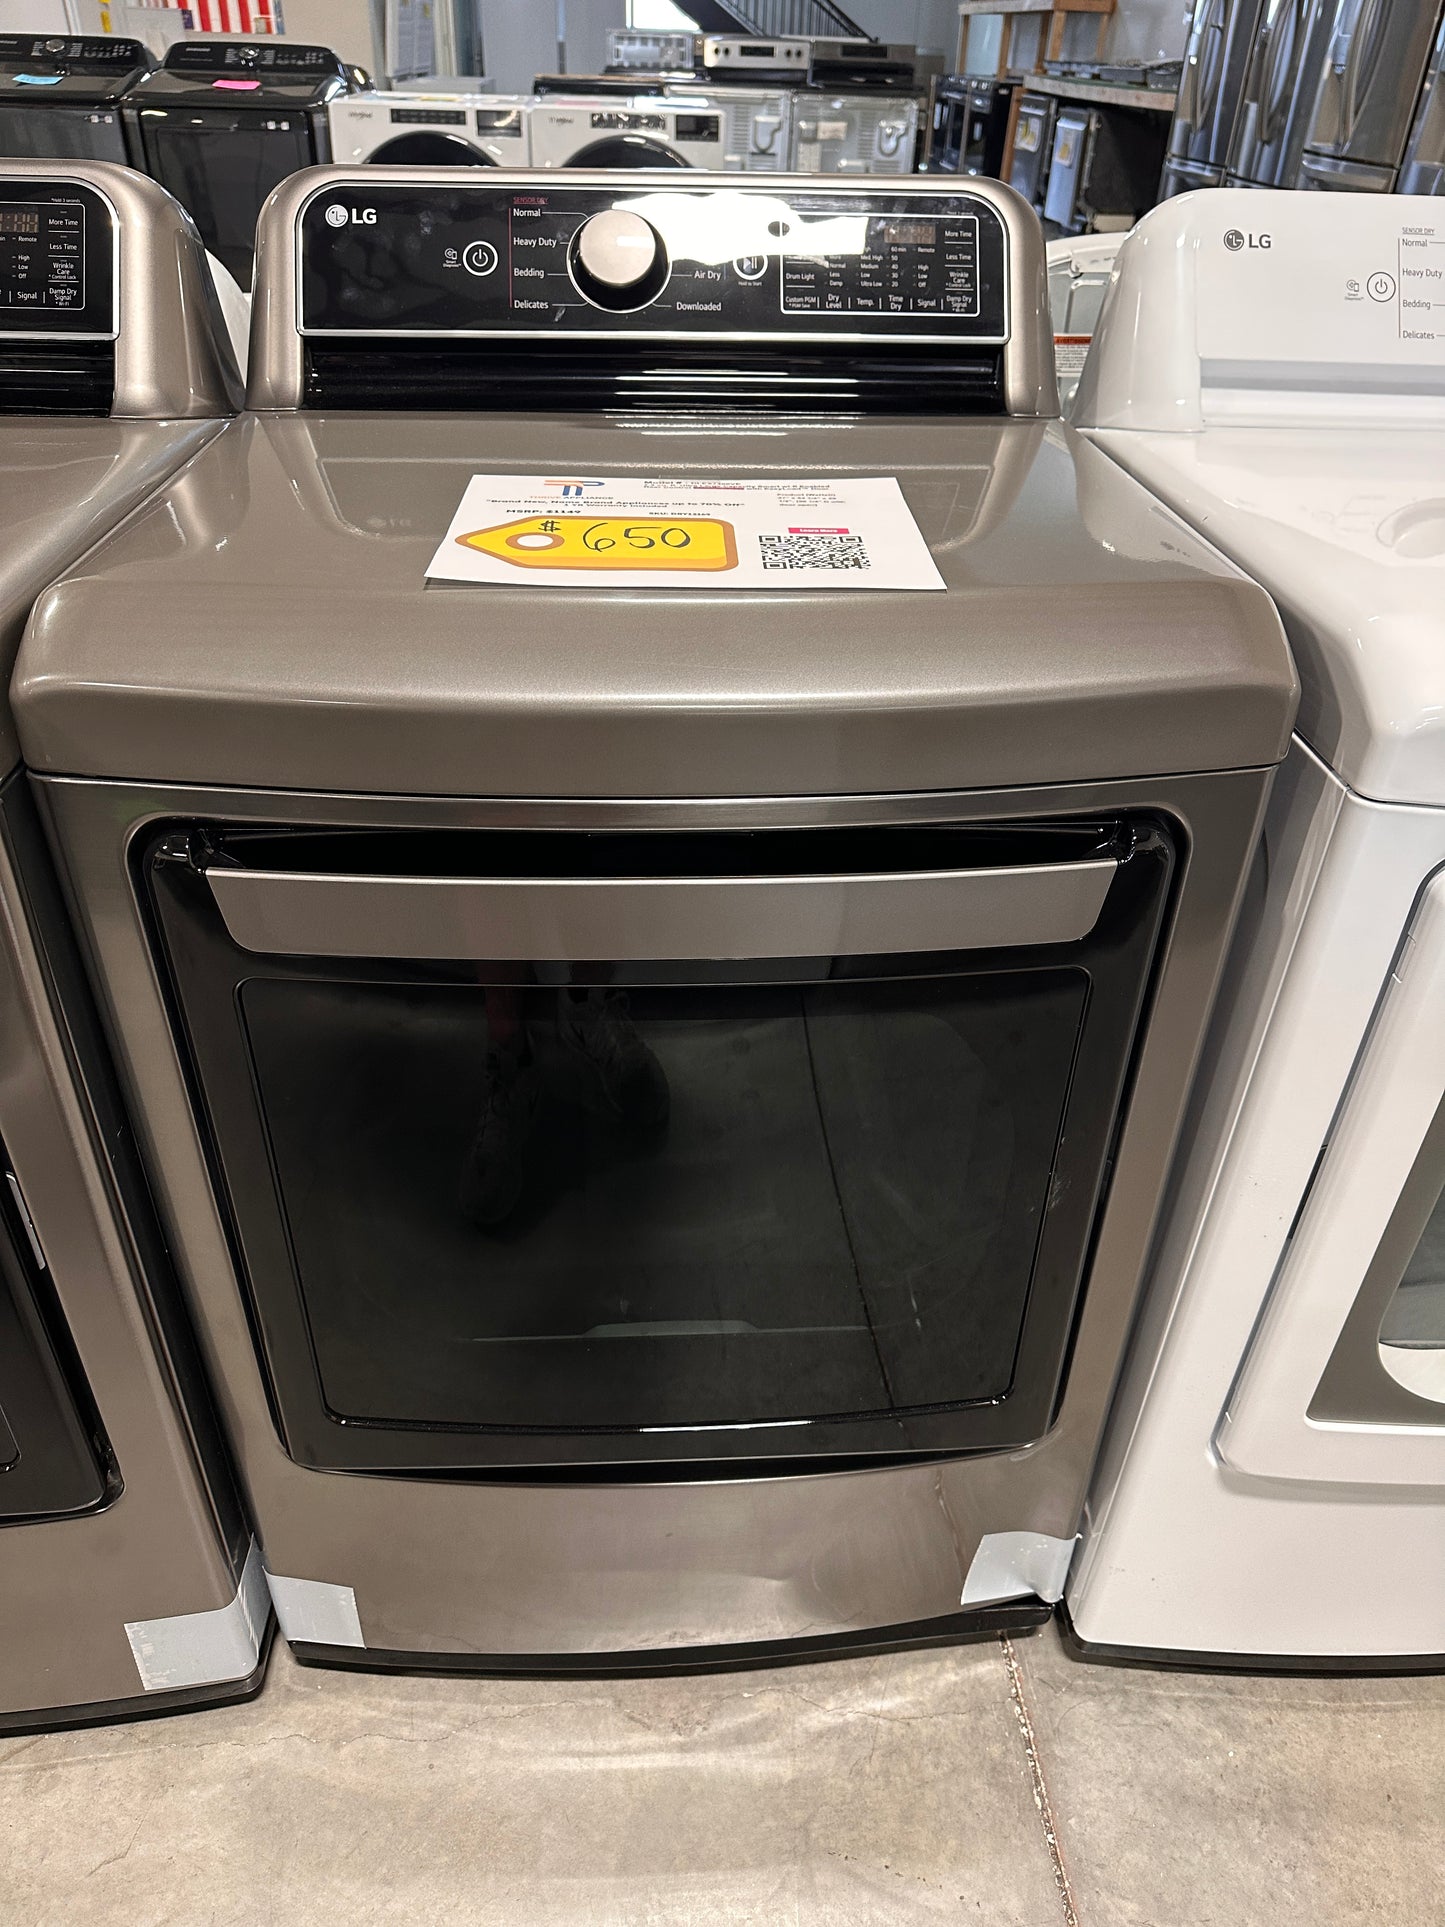 GORGEOUS ELECTRIC DRYER WITH EASYLOAD DOOR - DRY12169 DLE7400VE